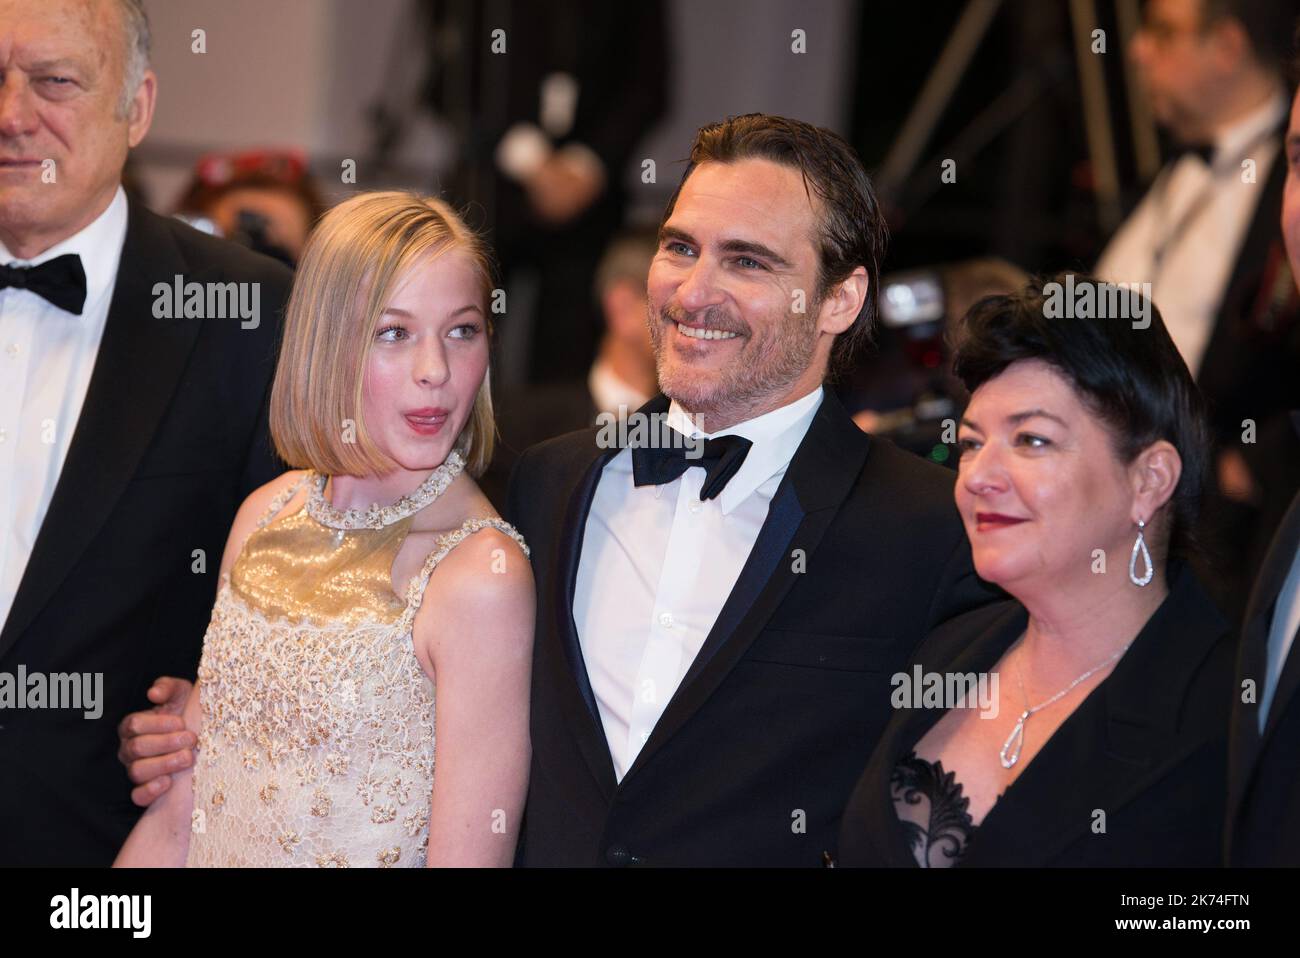 ©Quentin Veuillet/Wostok Press/Maxppp France Cannes 27/05/2017 US actor Alex Manette, Scottish director Lynne Ramsay, US actor Joaquin Phoenix and Actress Ekaterina Samsonov arrive for the premiere of 'You Were Never Really Here' during the 70th annual Cannes Film Festival, in Cannes Stock Photo